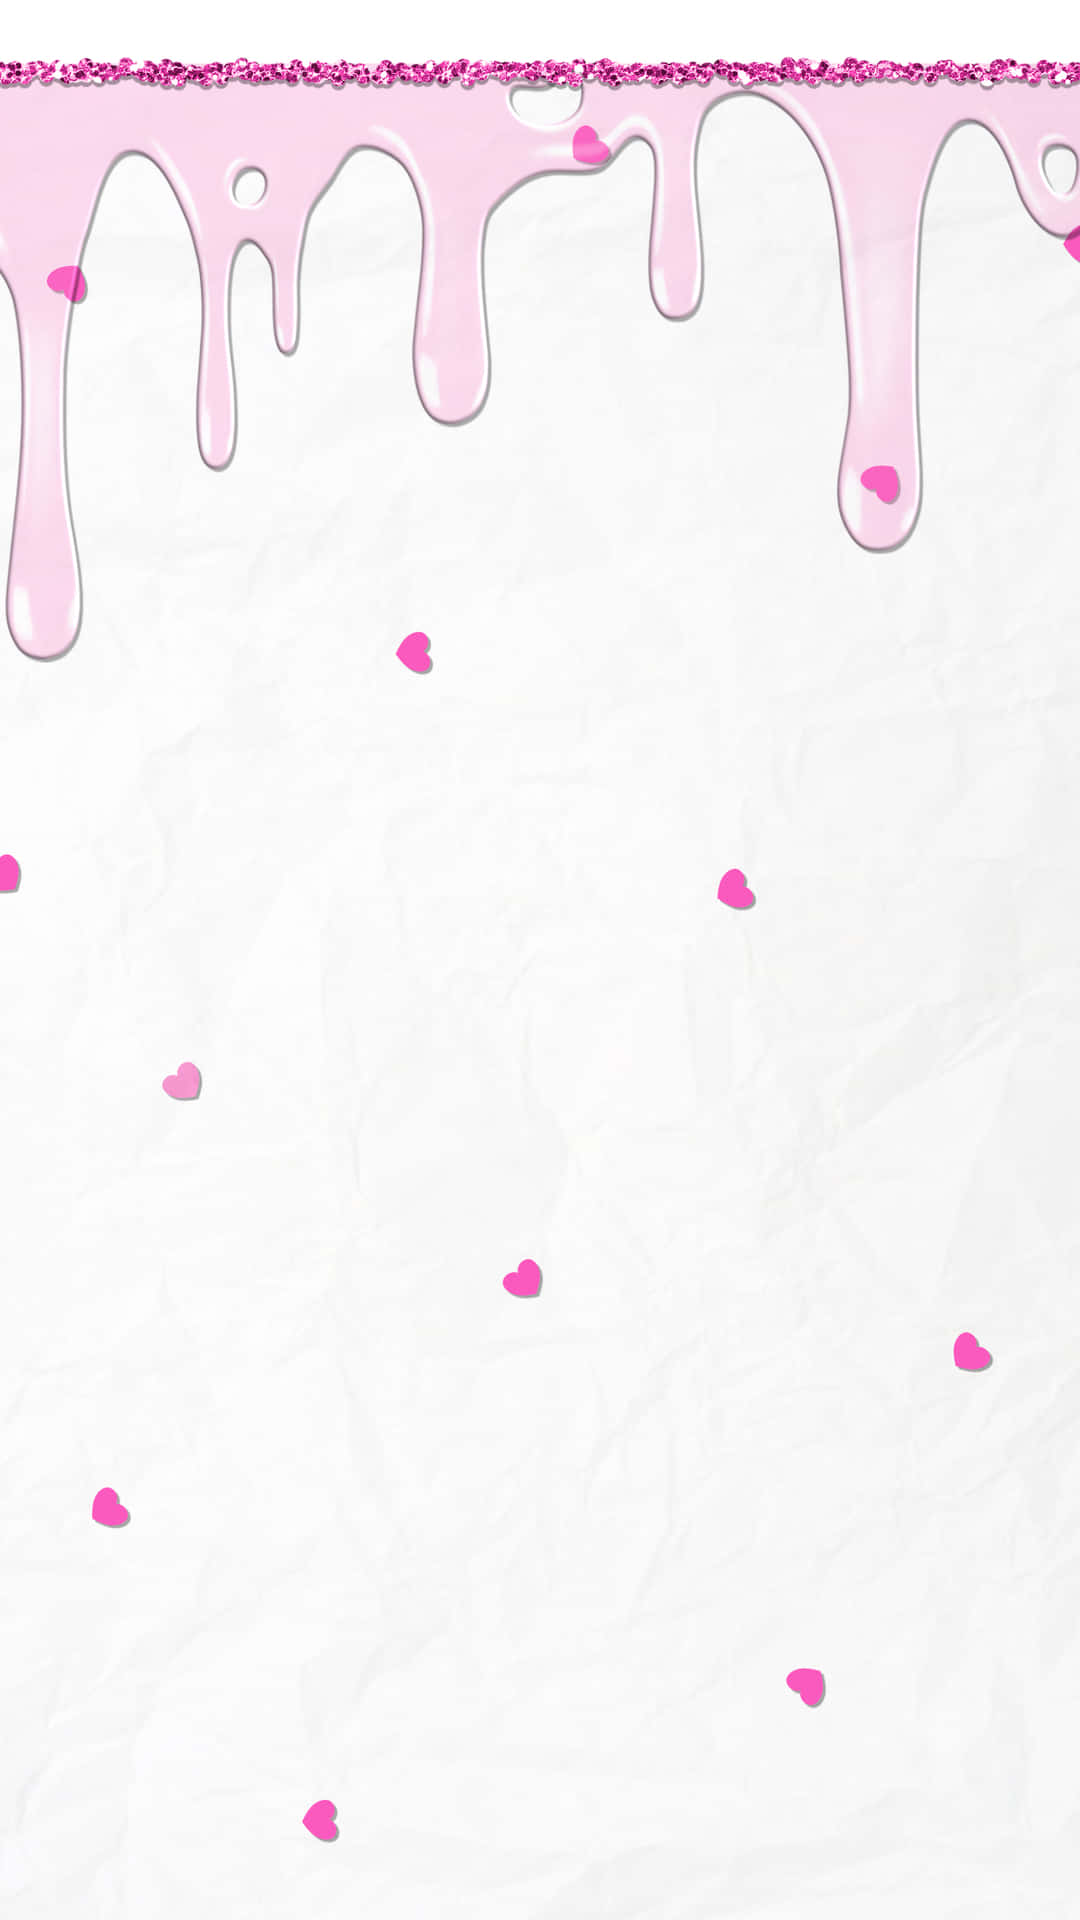 Feel the joy of spring with this simple pink wallpaper Wallpaper